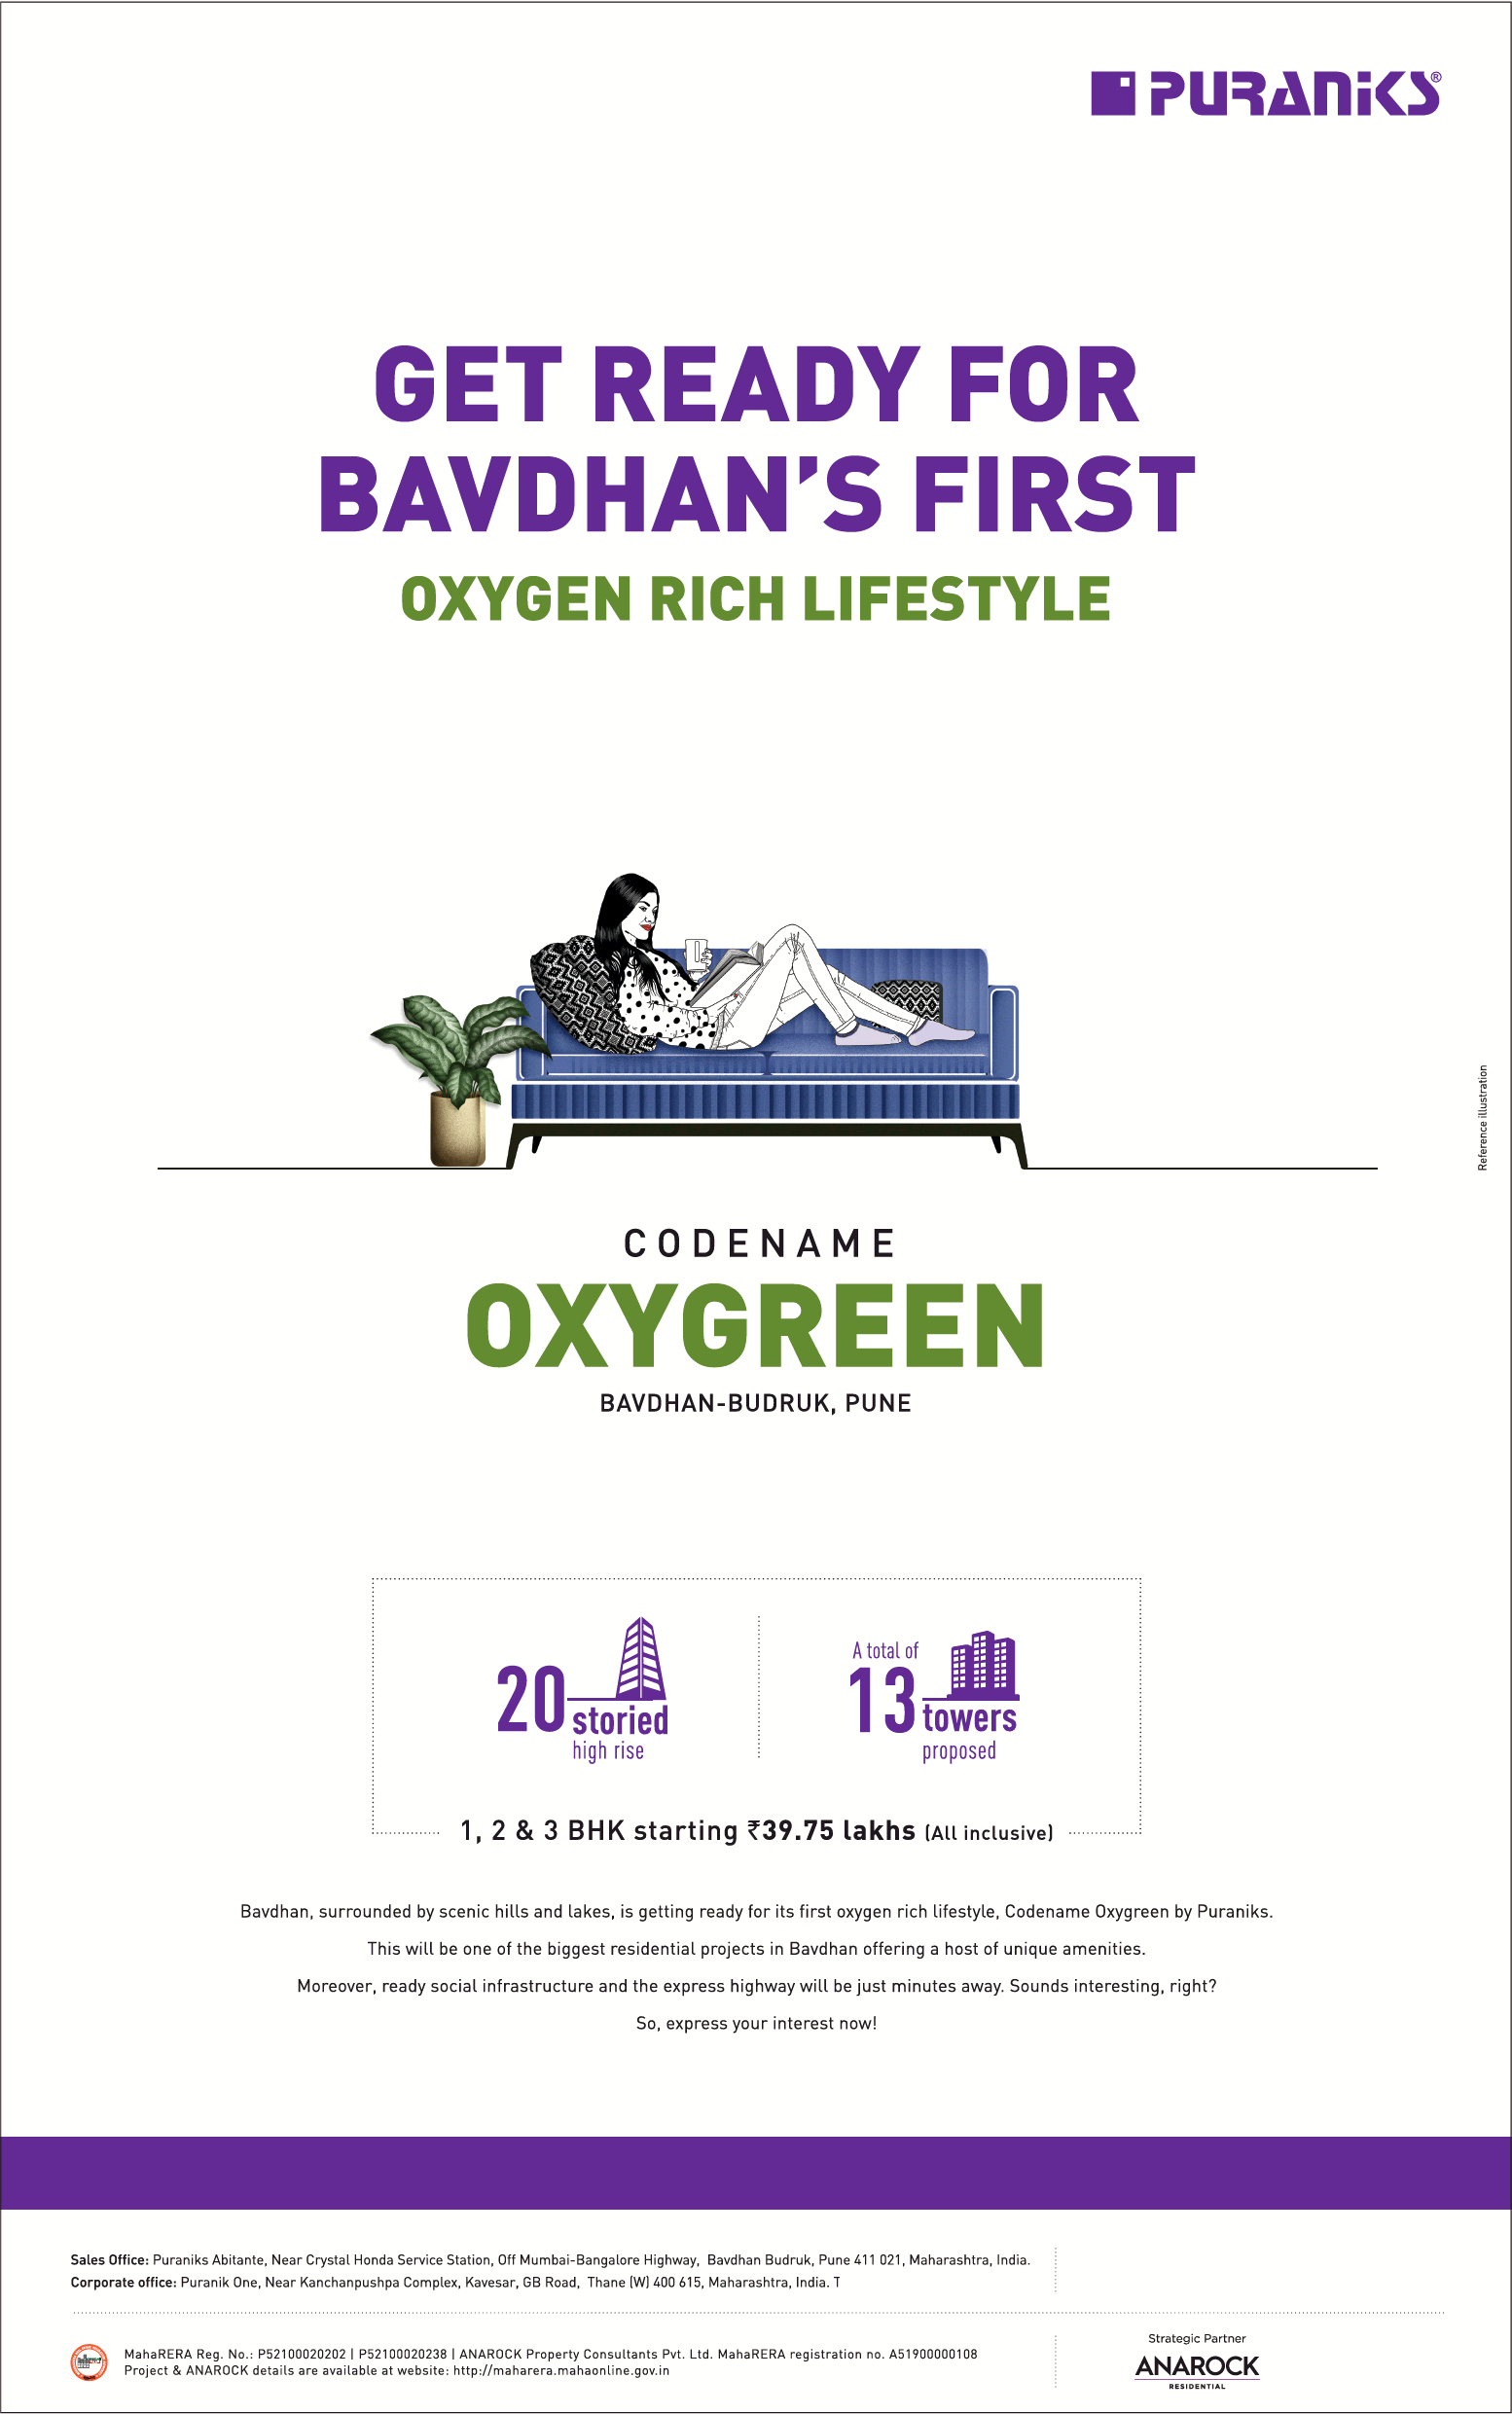 Book 1, 2 & 3 BHK starting Rs 39.75 Lac (all inclusive) at Puraniks Codename Oxygreen, Pune Update